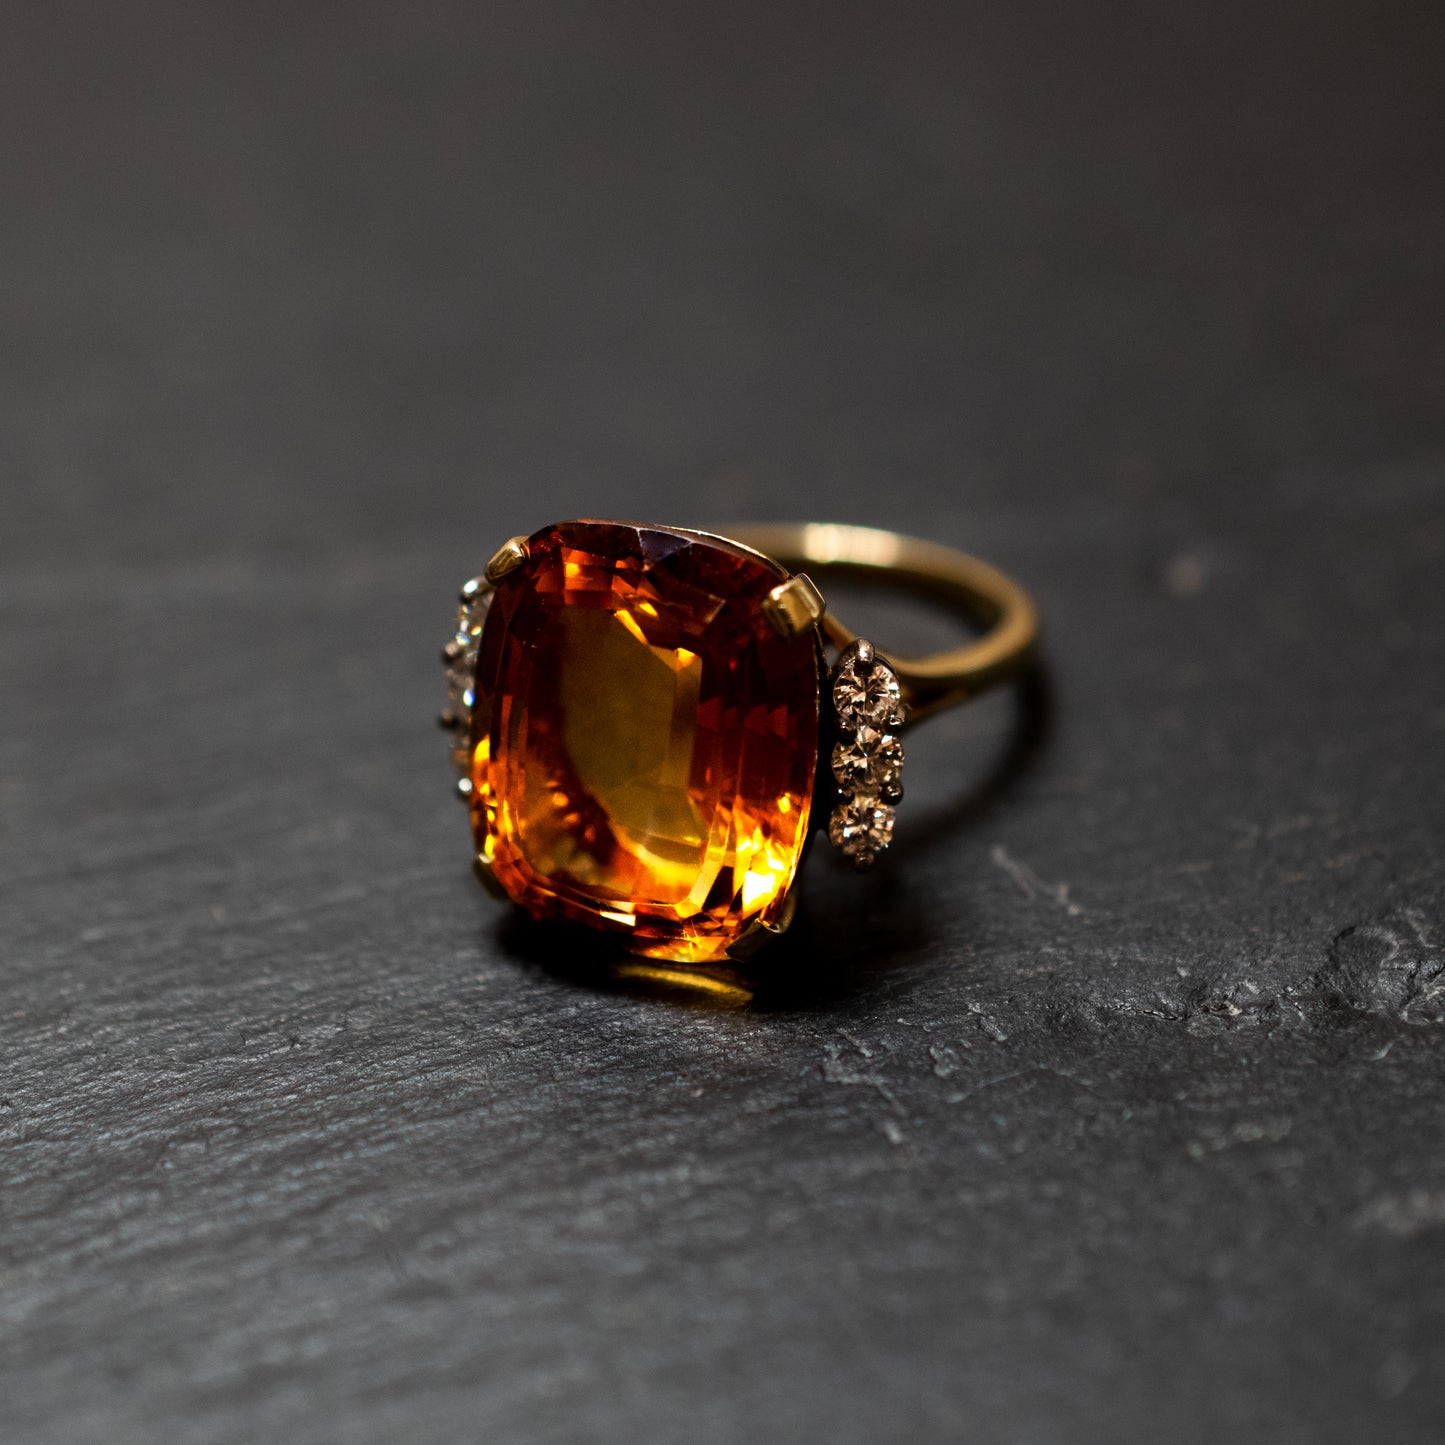 Pre-Owned: One 18ct yellow gold citrine & diamond cocktail ring - 0.42ct.